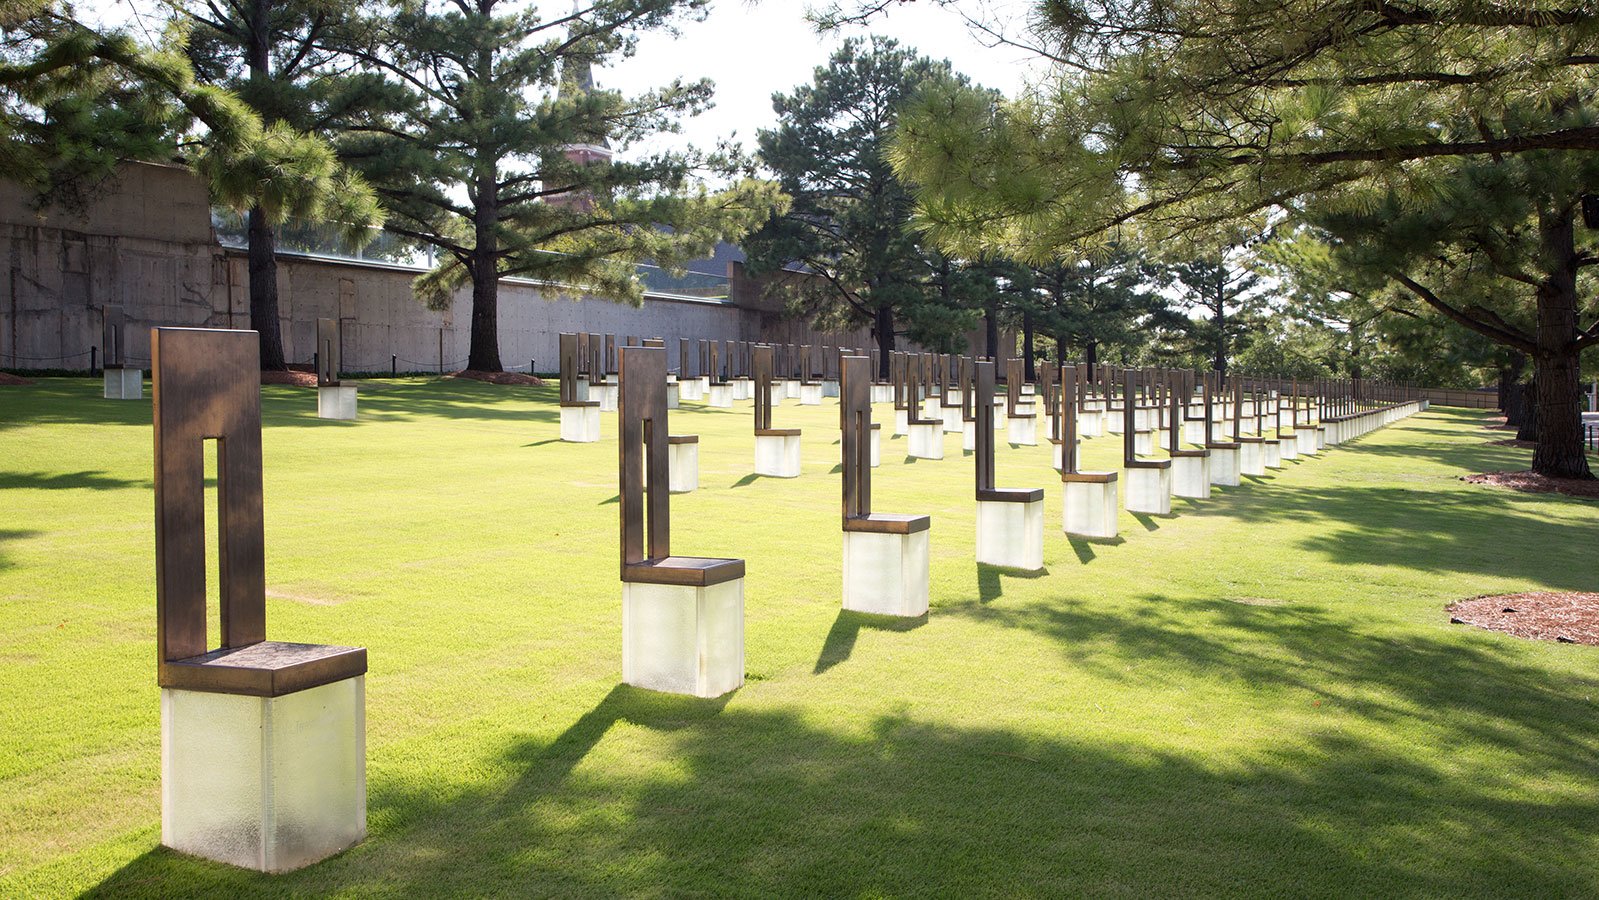 The field of 168 empty chairs represents the lives taken on April 19, 1995